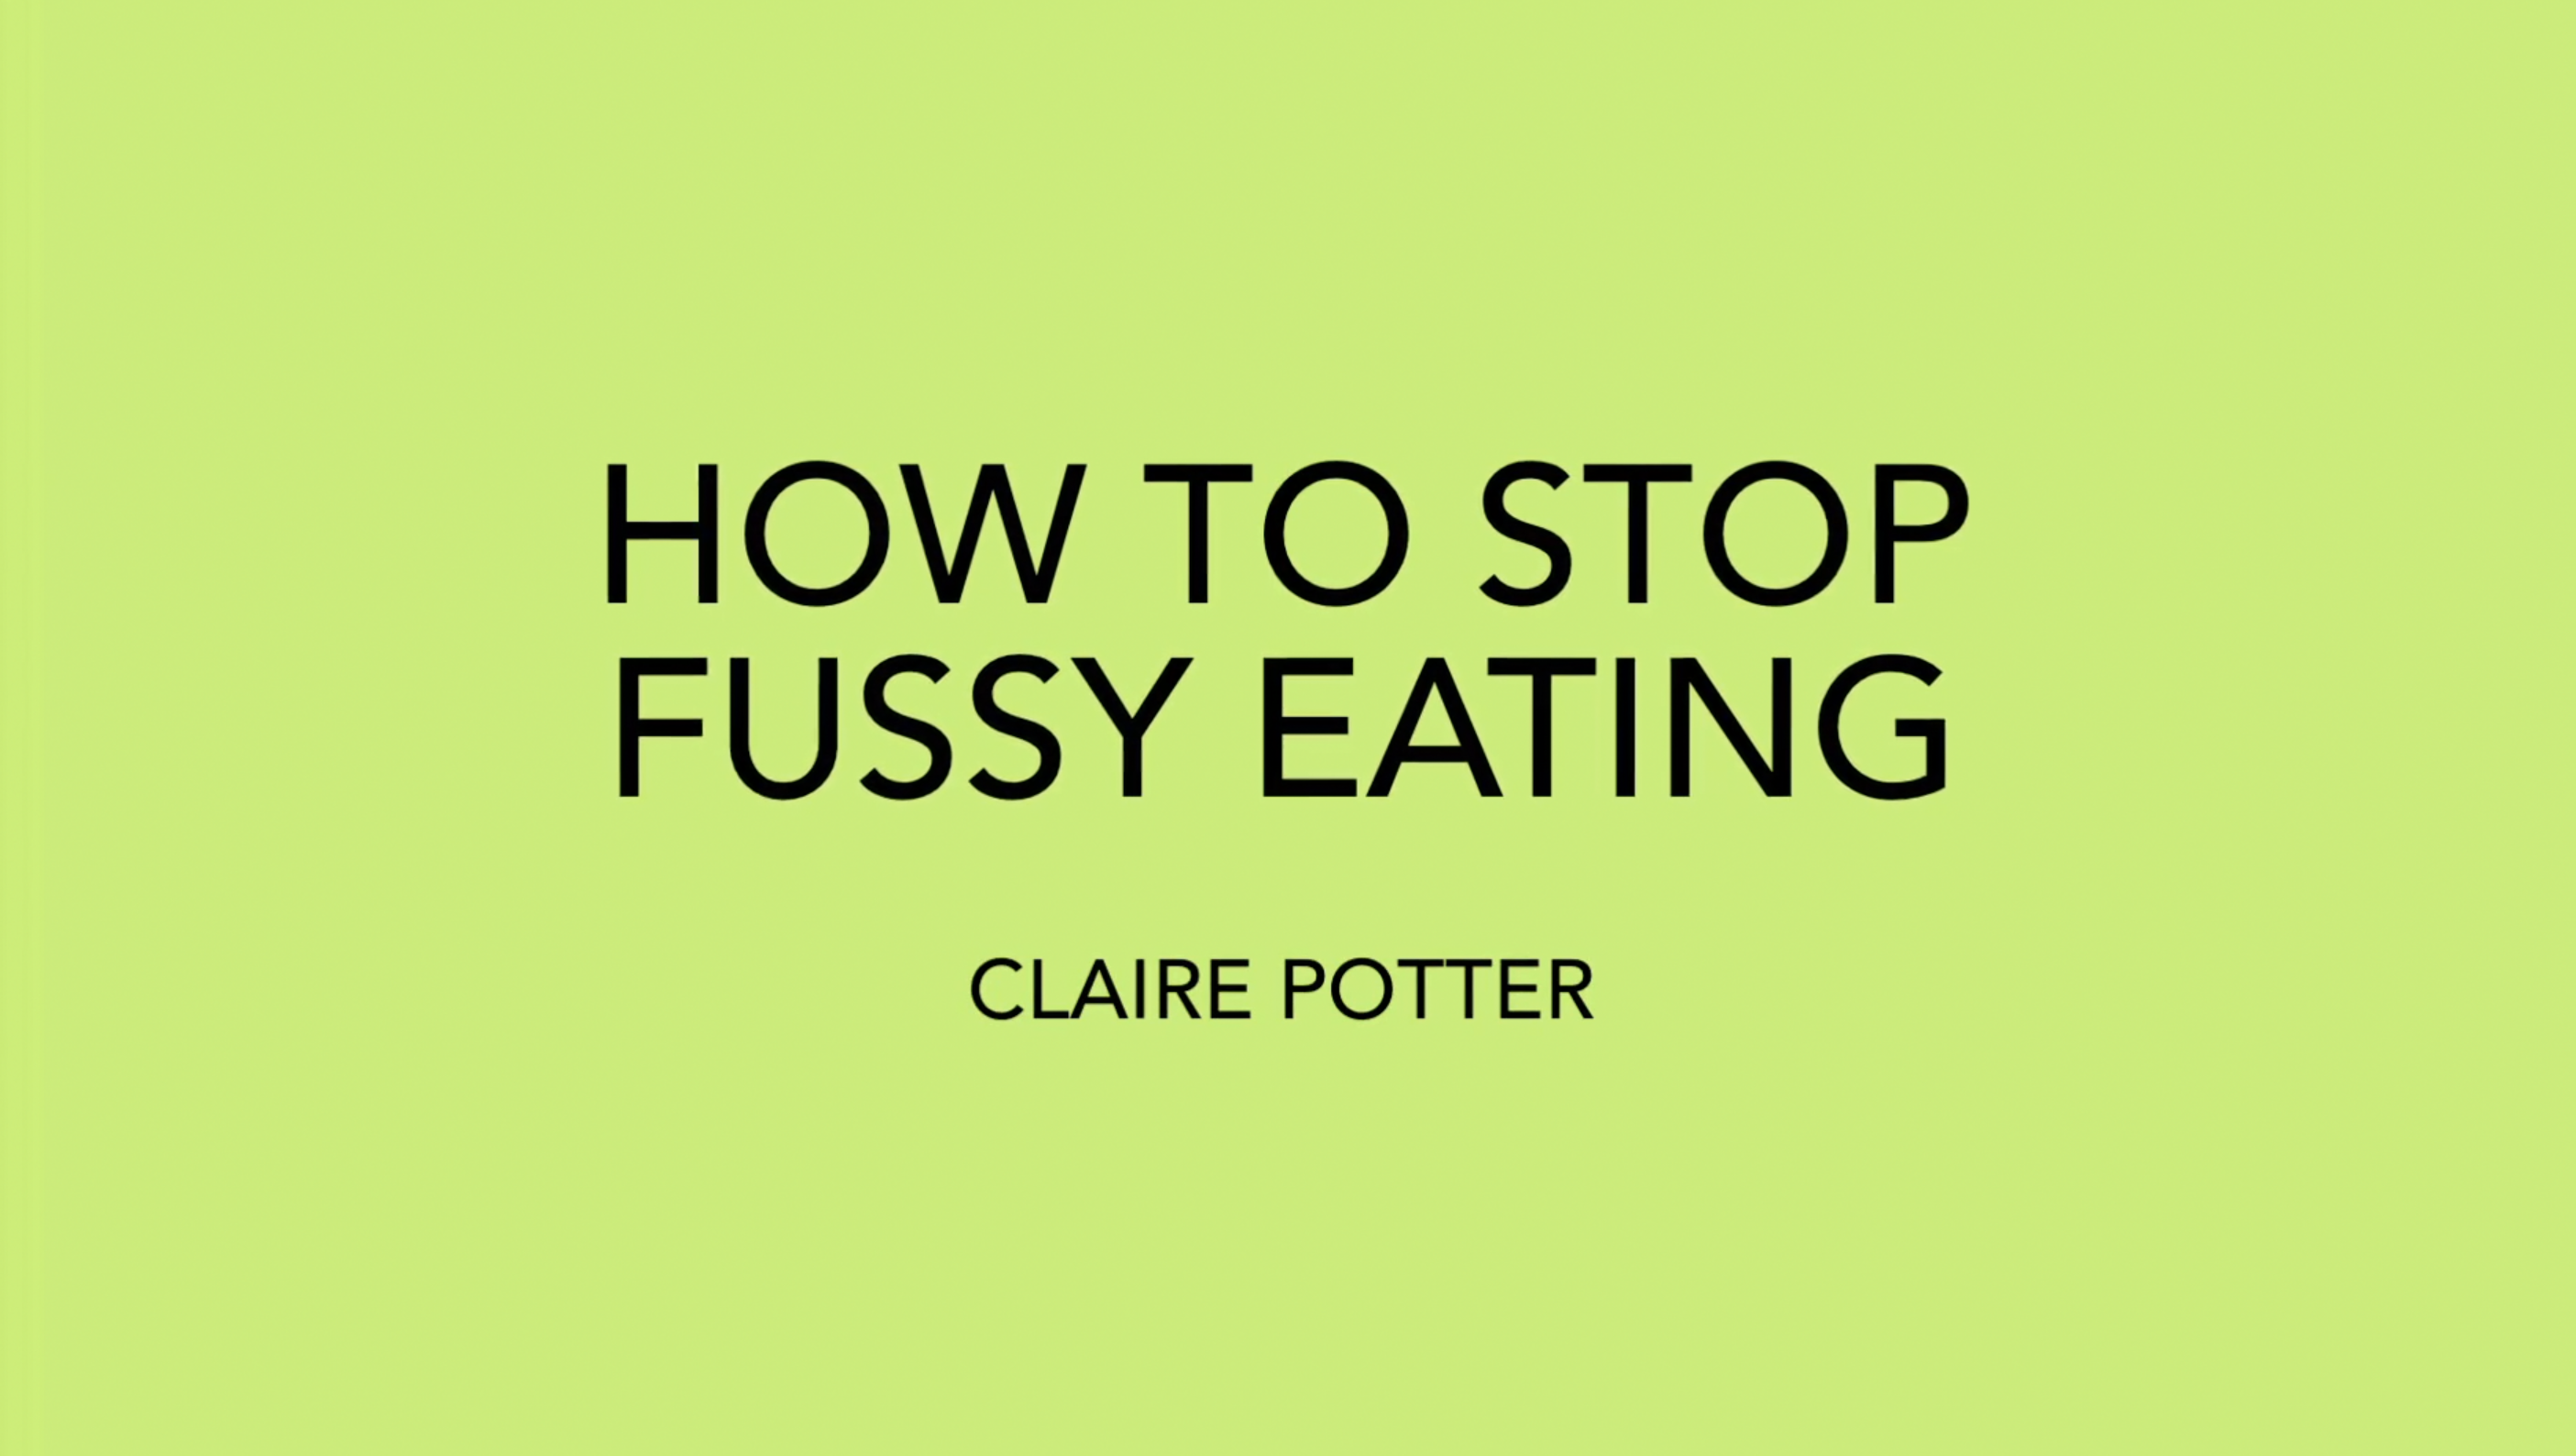 How To Stop Fussy Eating Mini-Course With Claire Potter